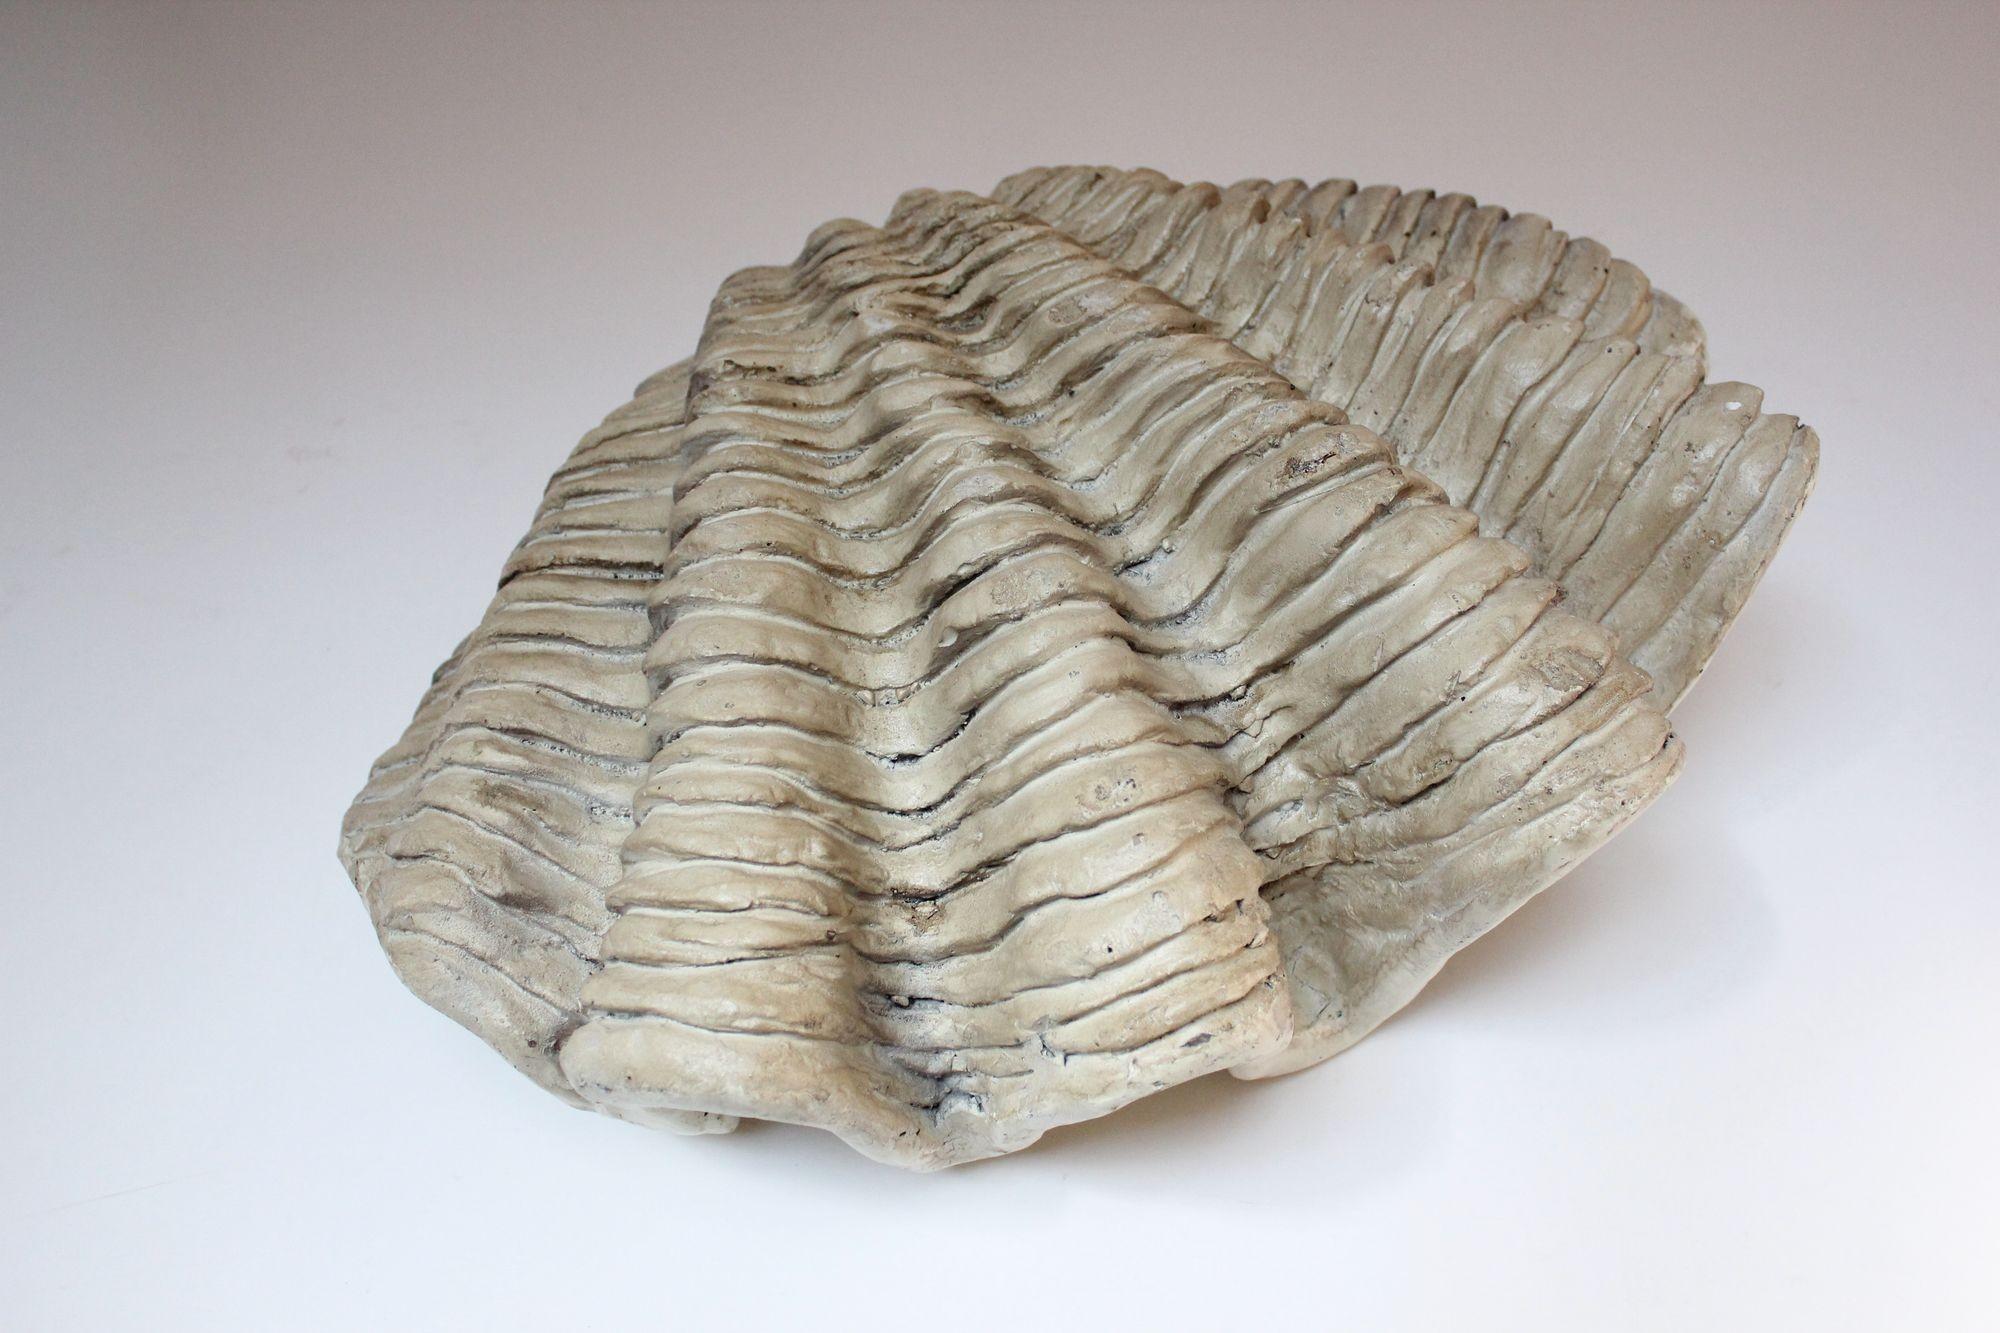 Faux giant Tridacna clam shell in cast/modeled plaster and resin (ca. 1940s/50s, USA).
Striking piece ideal as a functional serving/centerpiece or stand-alone charming object d'art with its impressive size and realistic detail.
There is natural